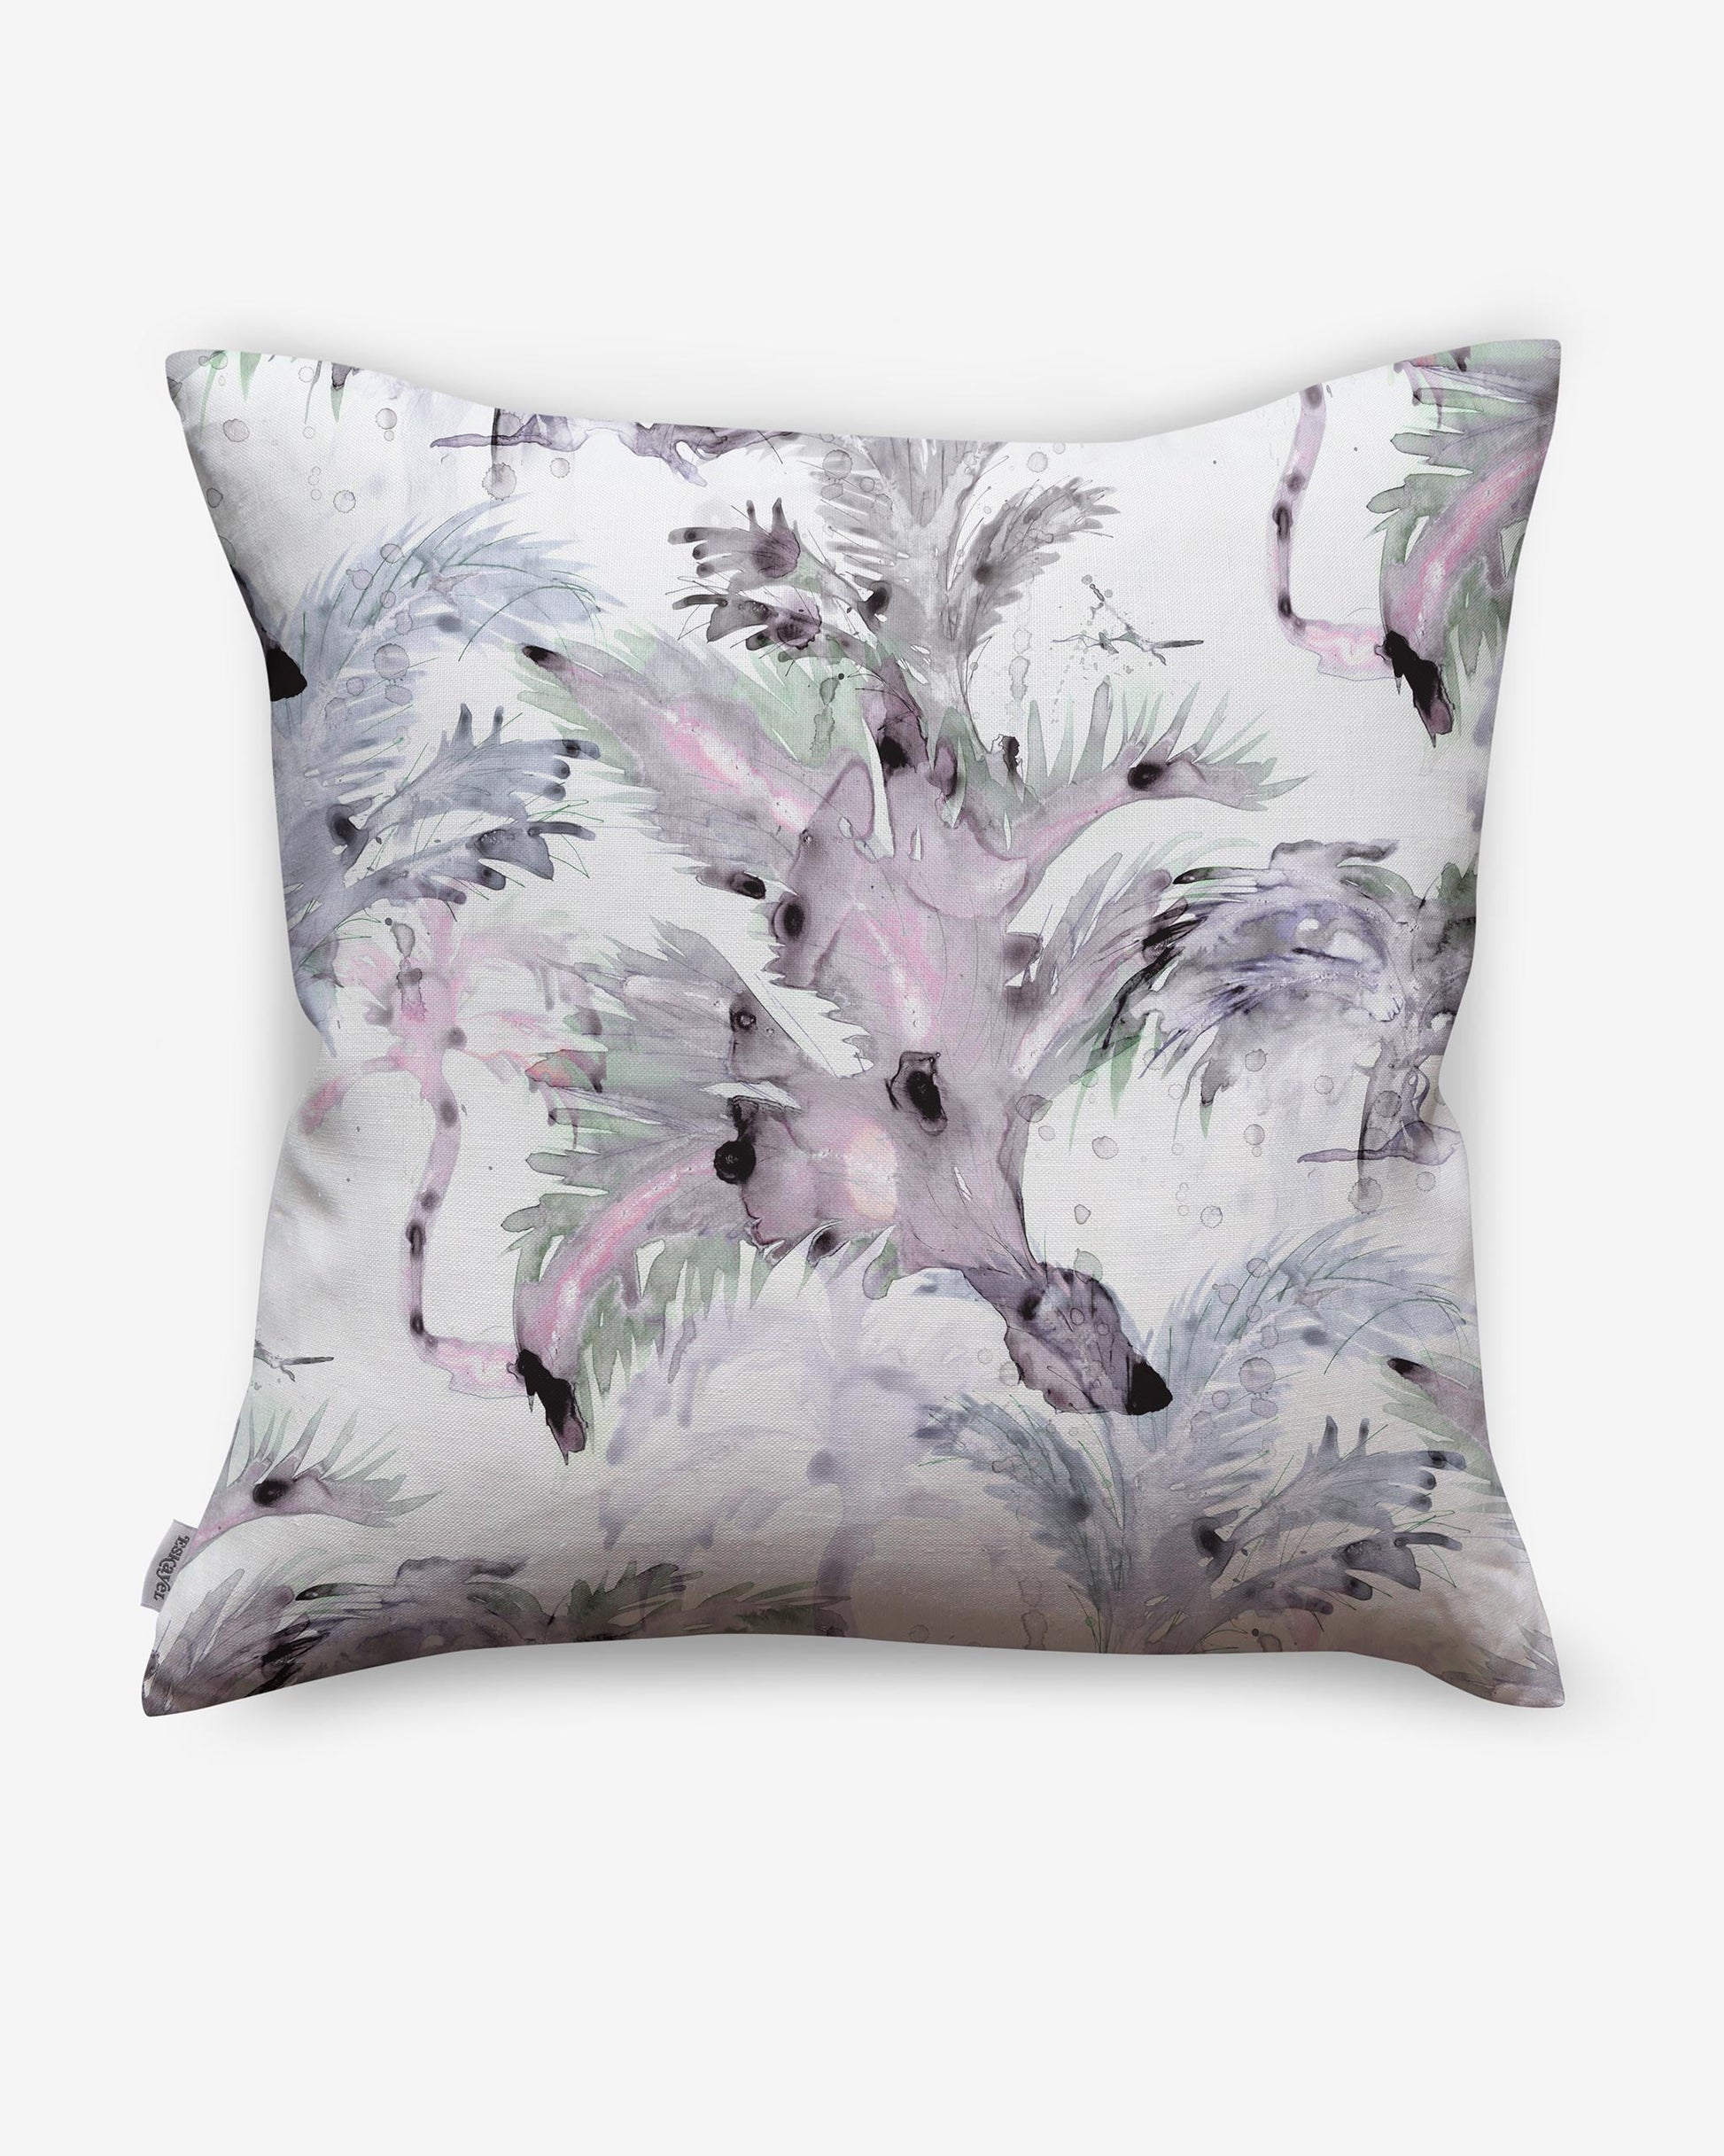 A Cocos Pillow Cay with a pink and purple flamingo print